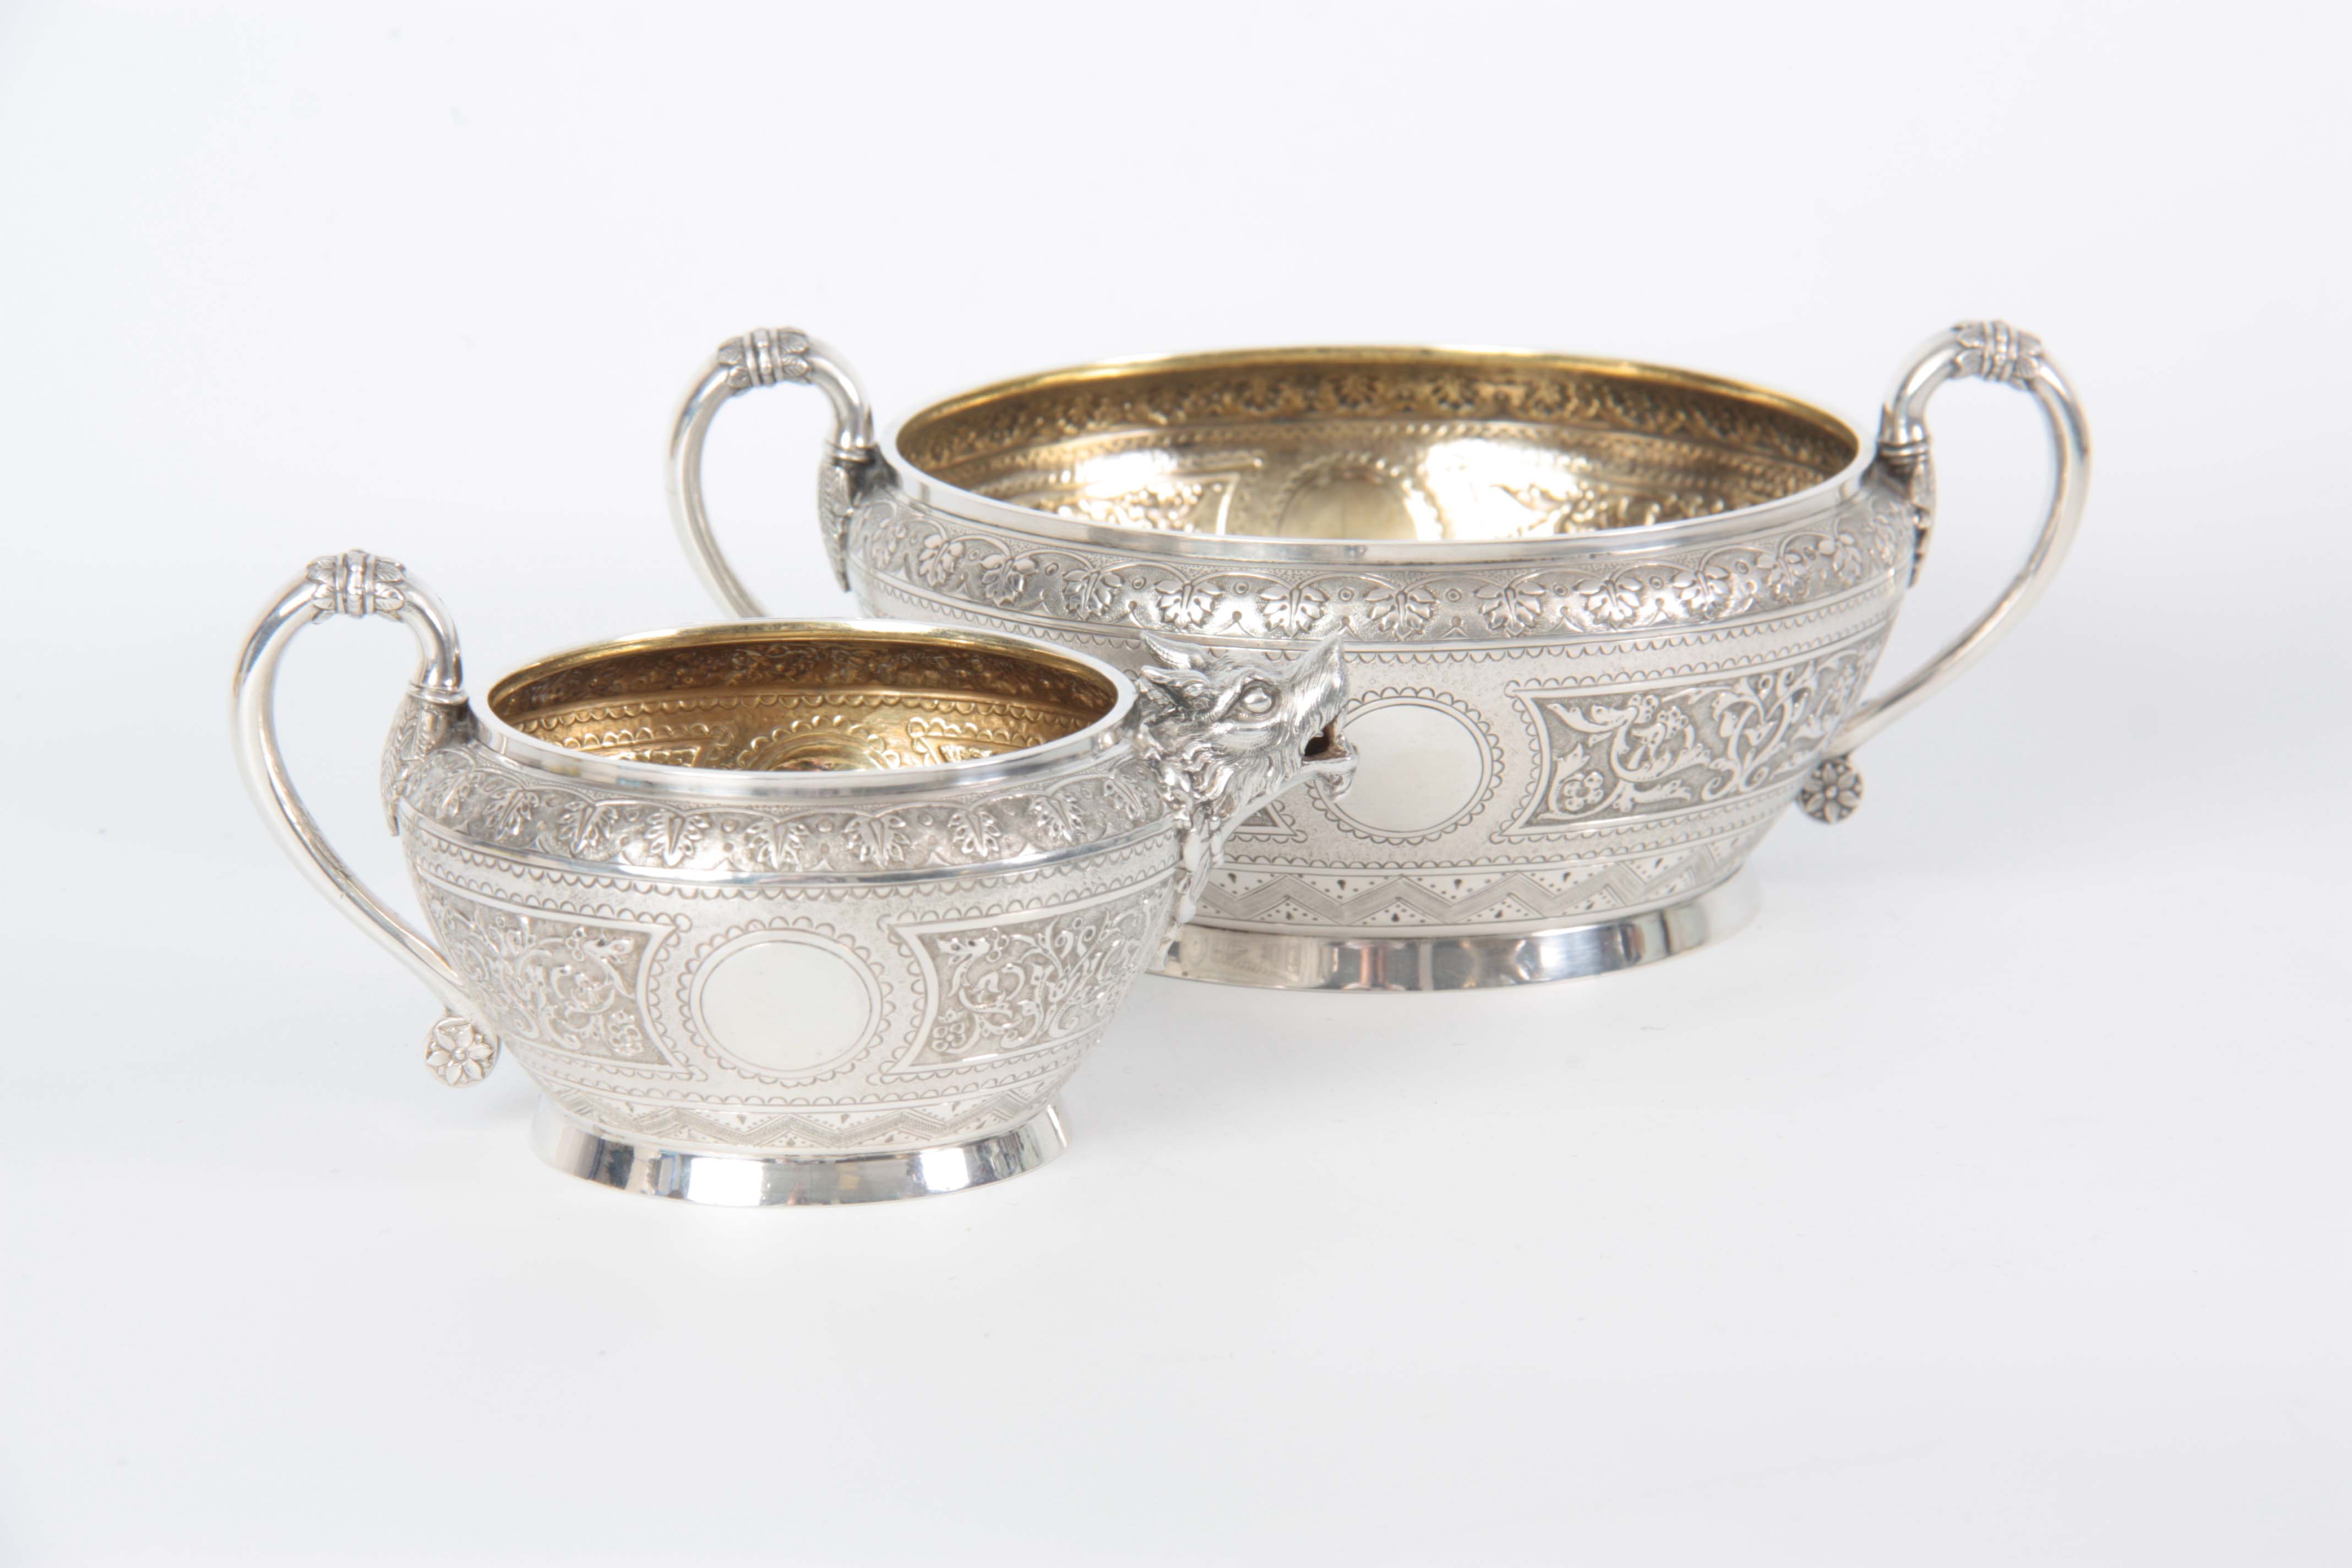 A VICTORIAN SILVER AND GILT CREAM JUG AND SUGAR BOWL having relief scroll-work panels and fine - Image 2 of 7